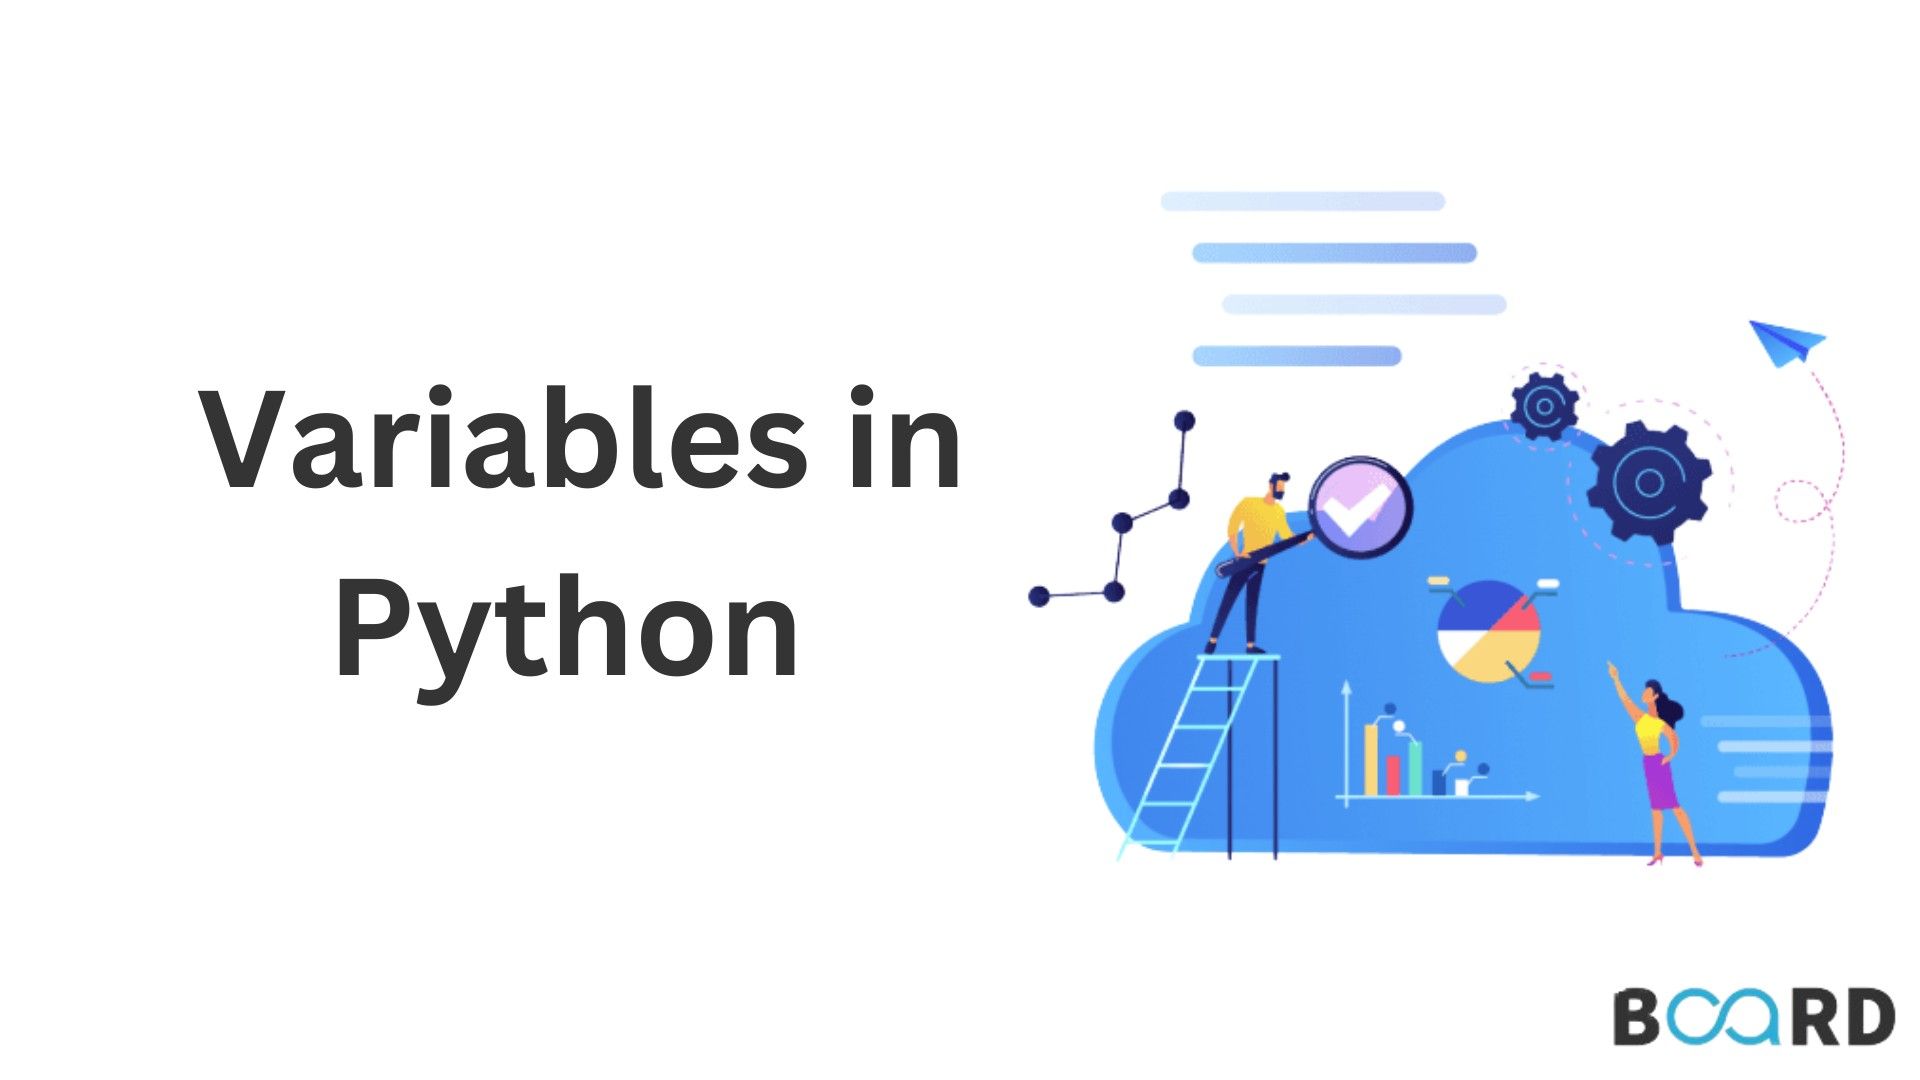 A-Z about Python Variables